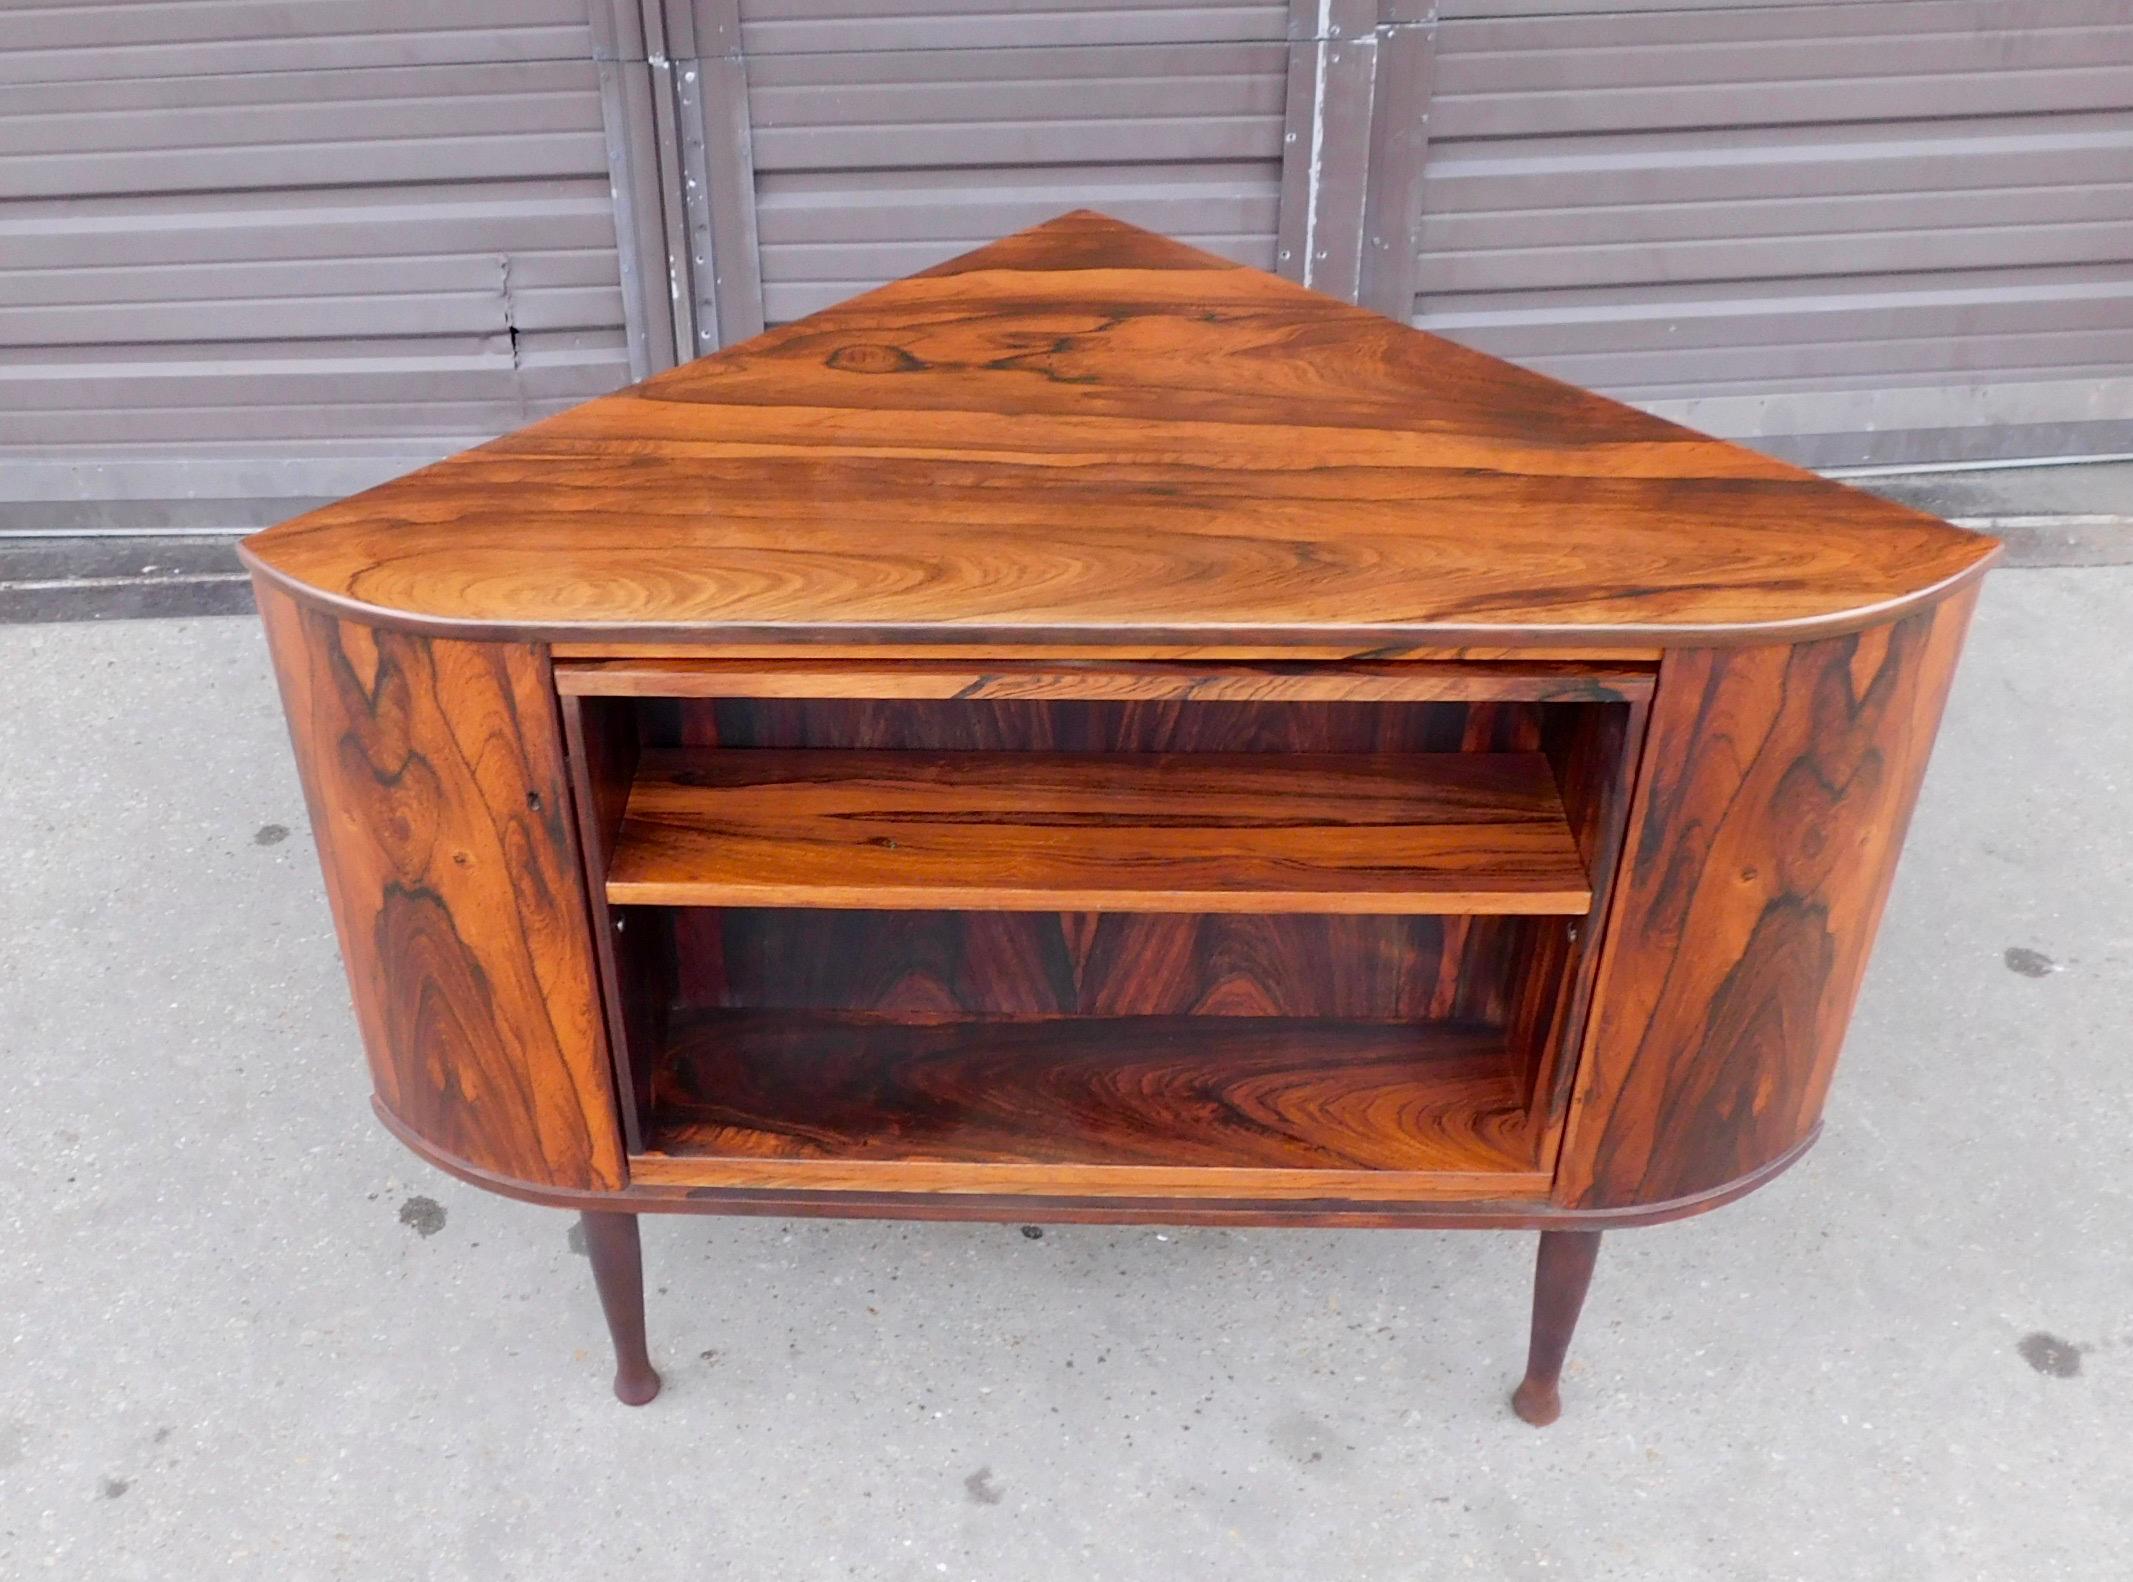 Danish Mid-Century Modern Rosewood Corner Dry Bar and Bookcase, circa 1960 For Sale 3